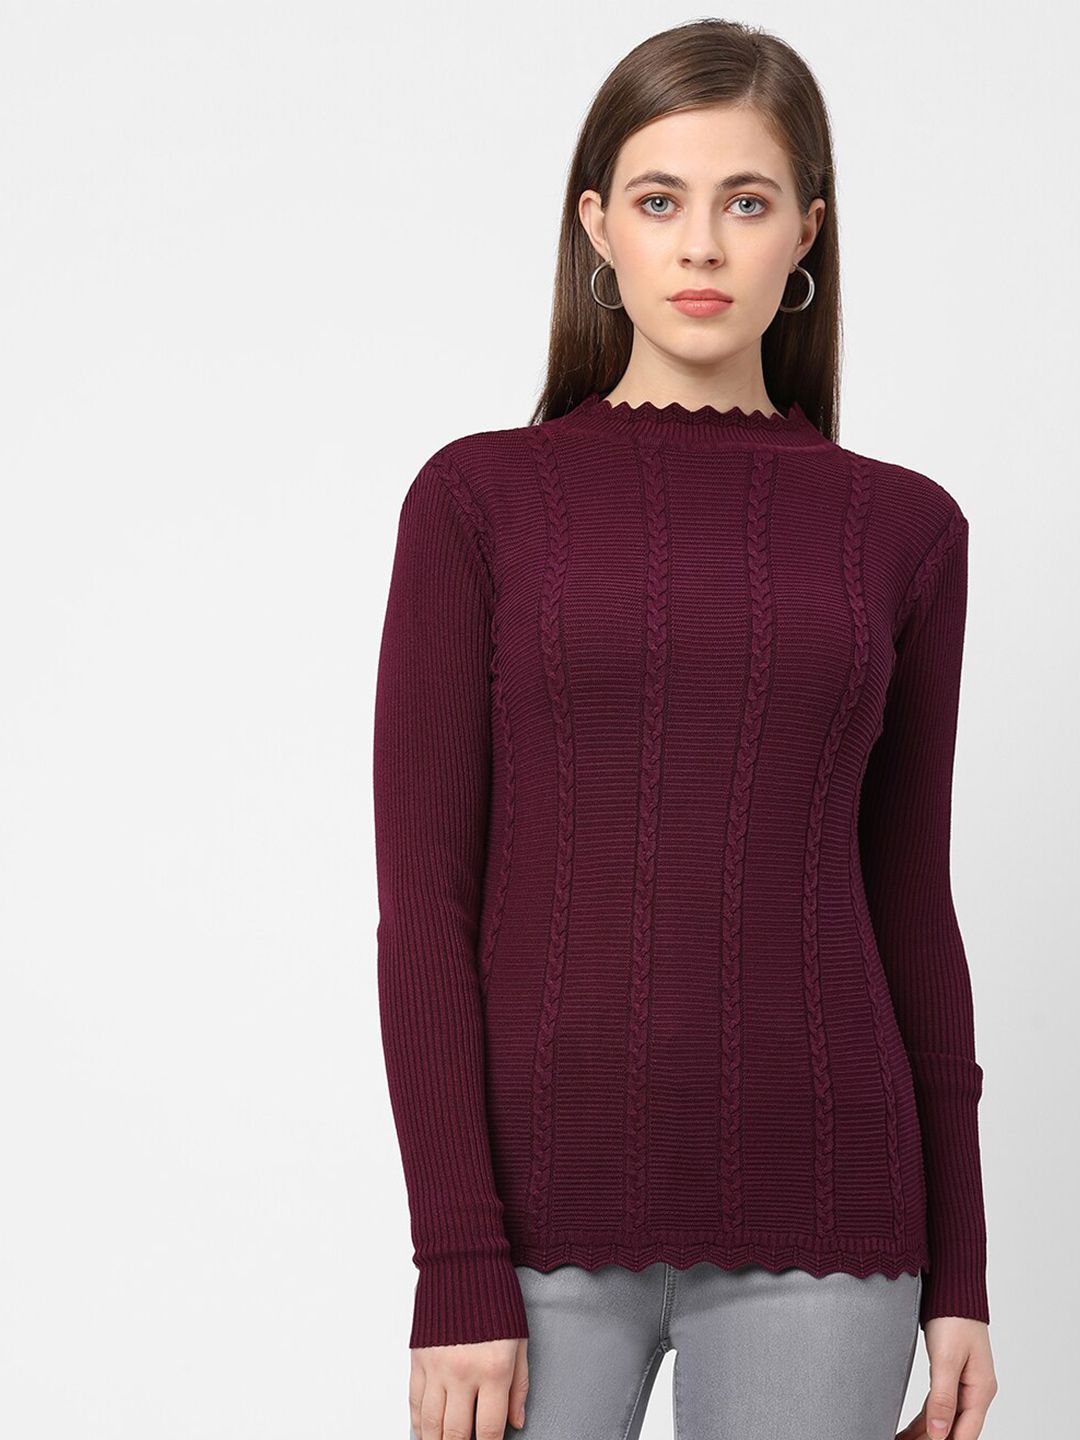 Kraus Jeans Women Maroon Cable Knit Pullover Sweater Price in India